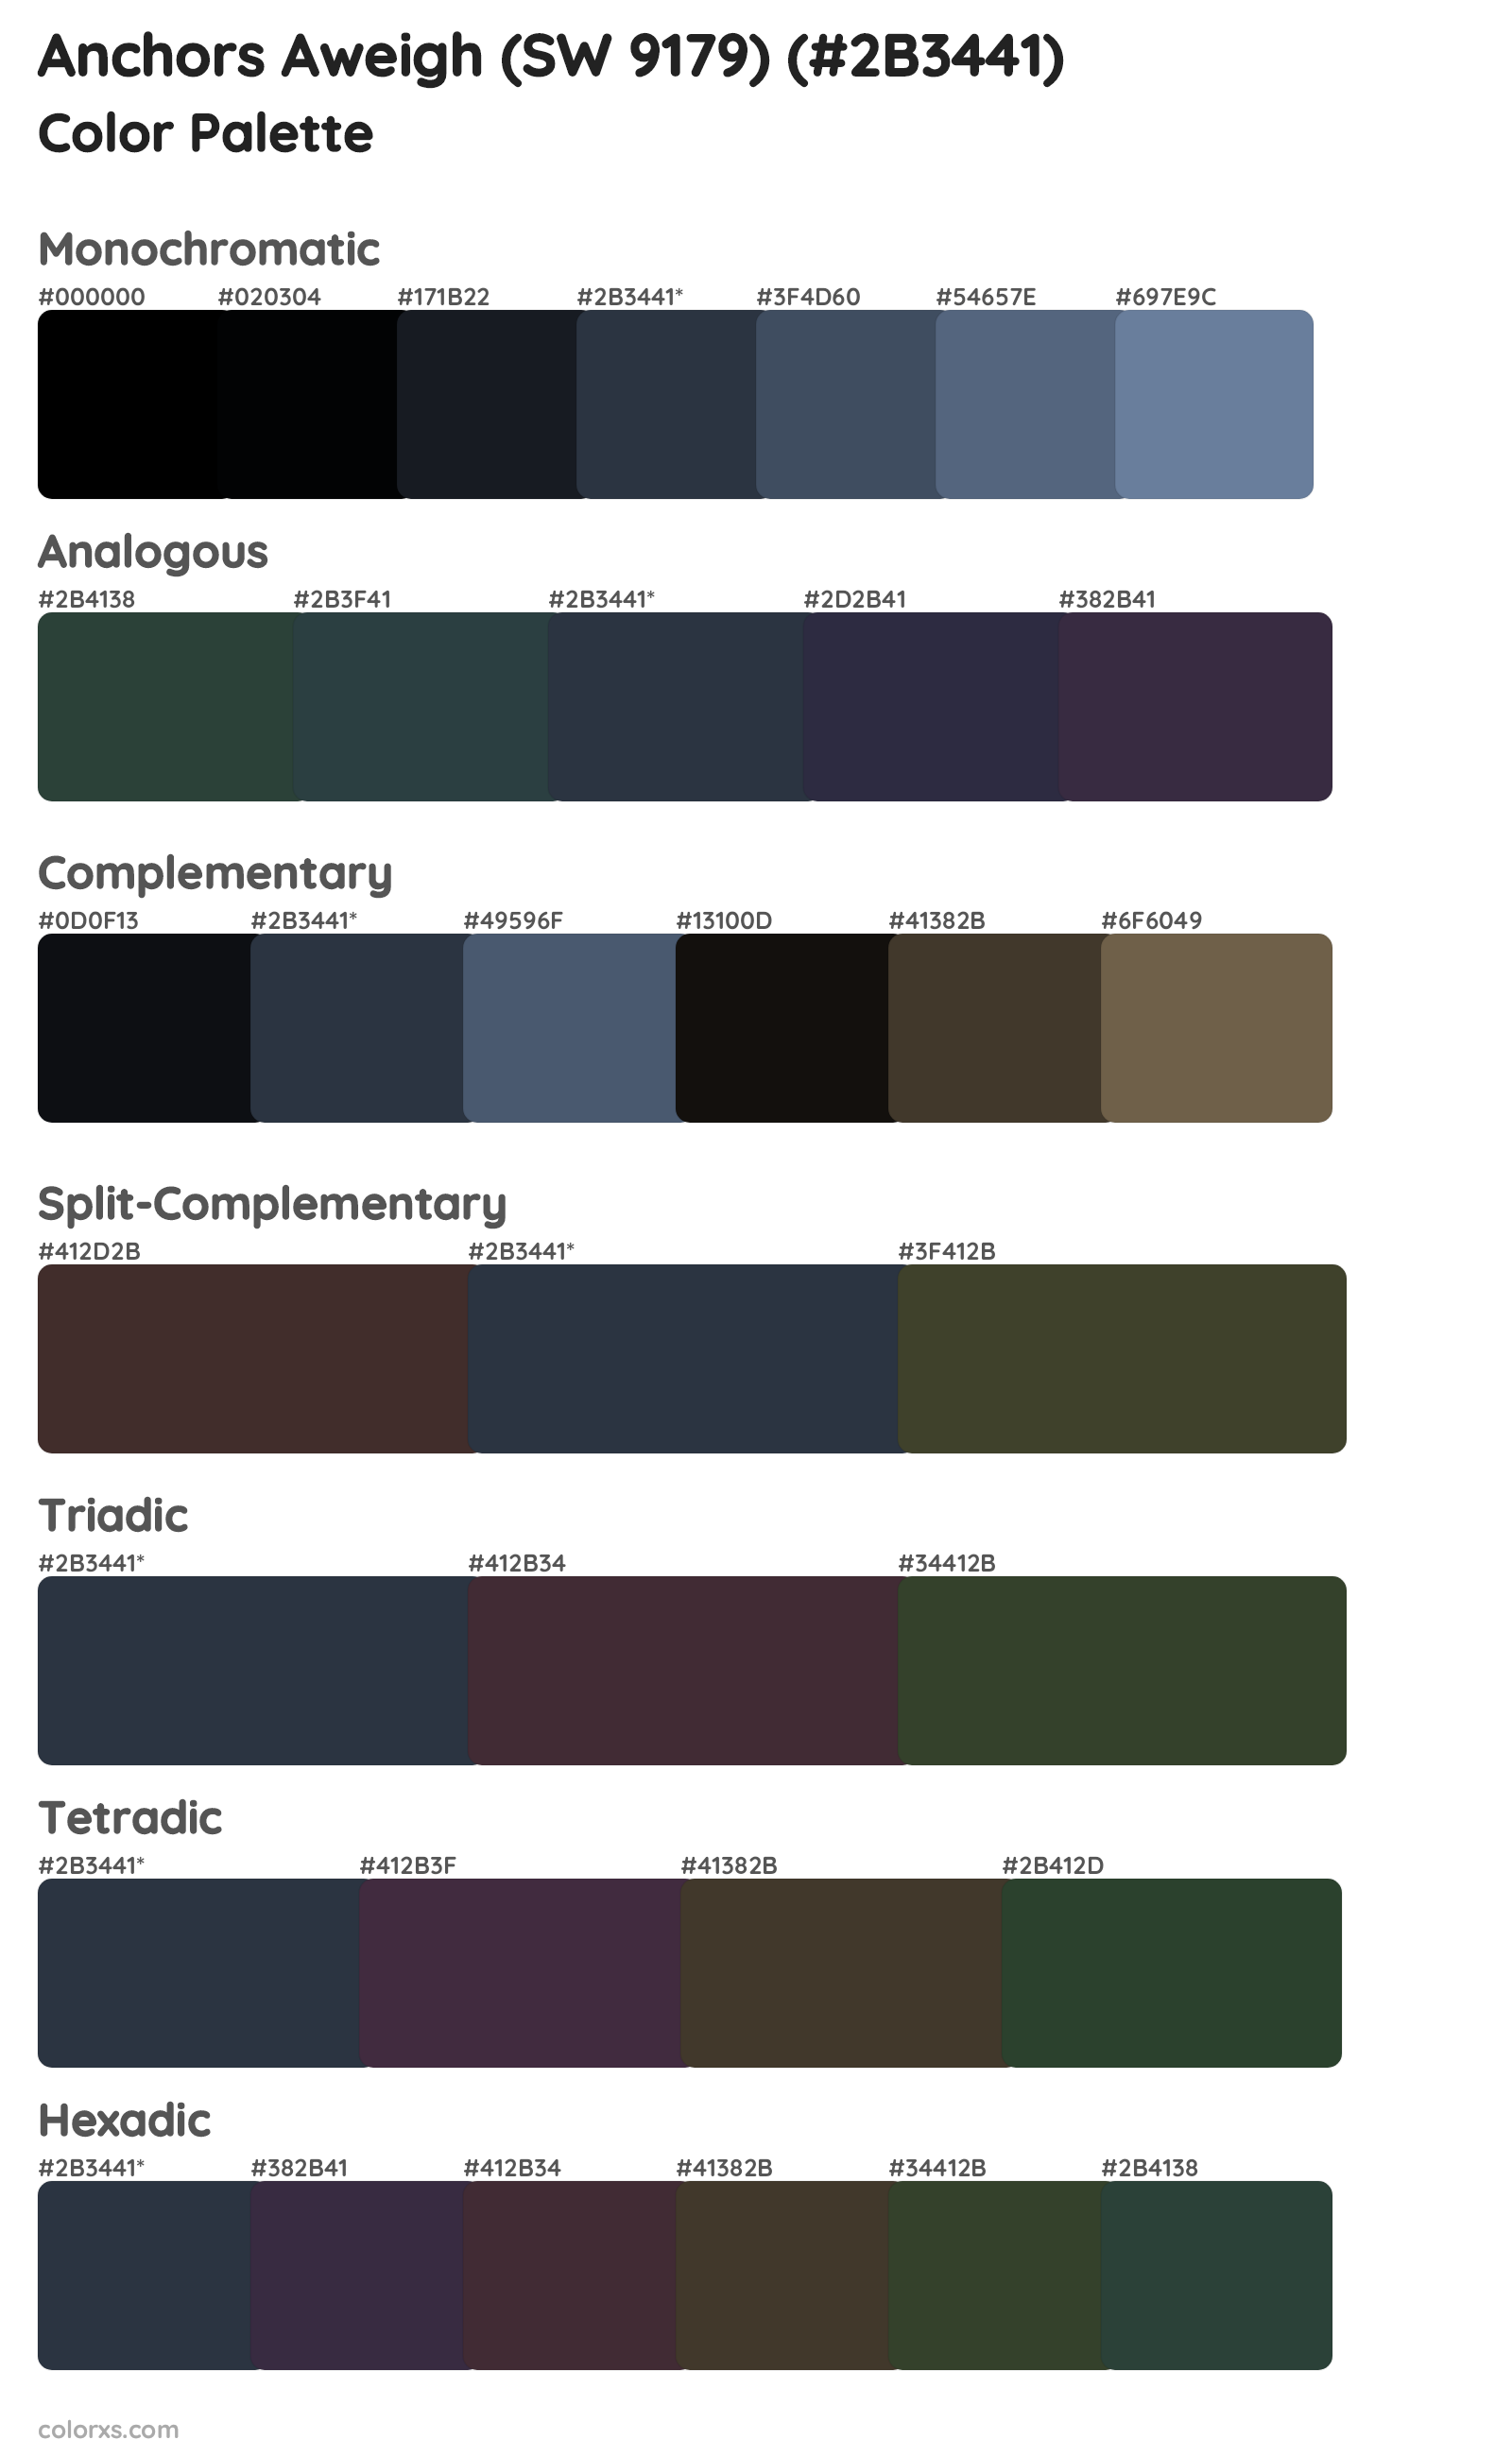 Anchors Aweigh (SW 9179) Color Scheme Palettes